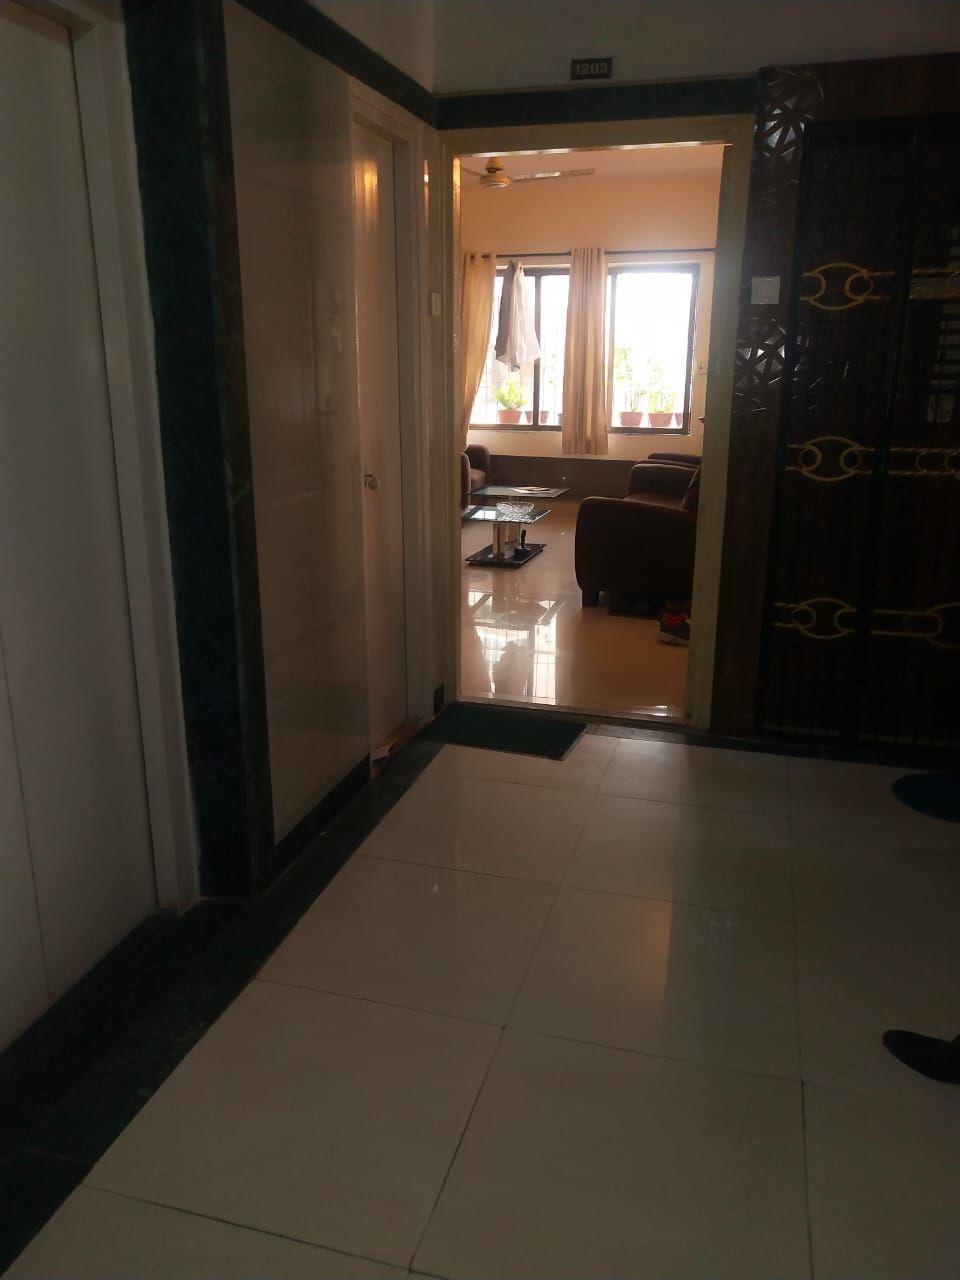 1 BHK 2 Baths Residential Flat for Rent